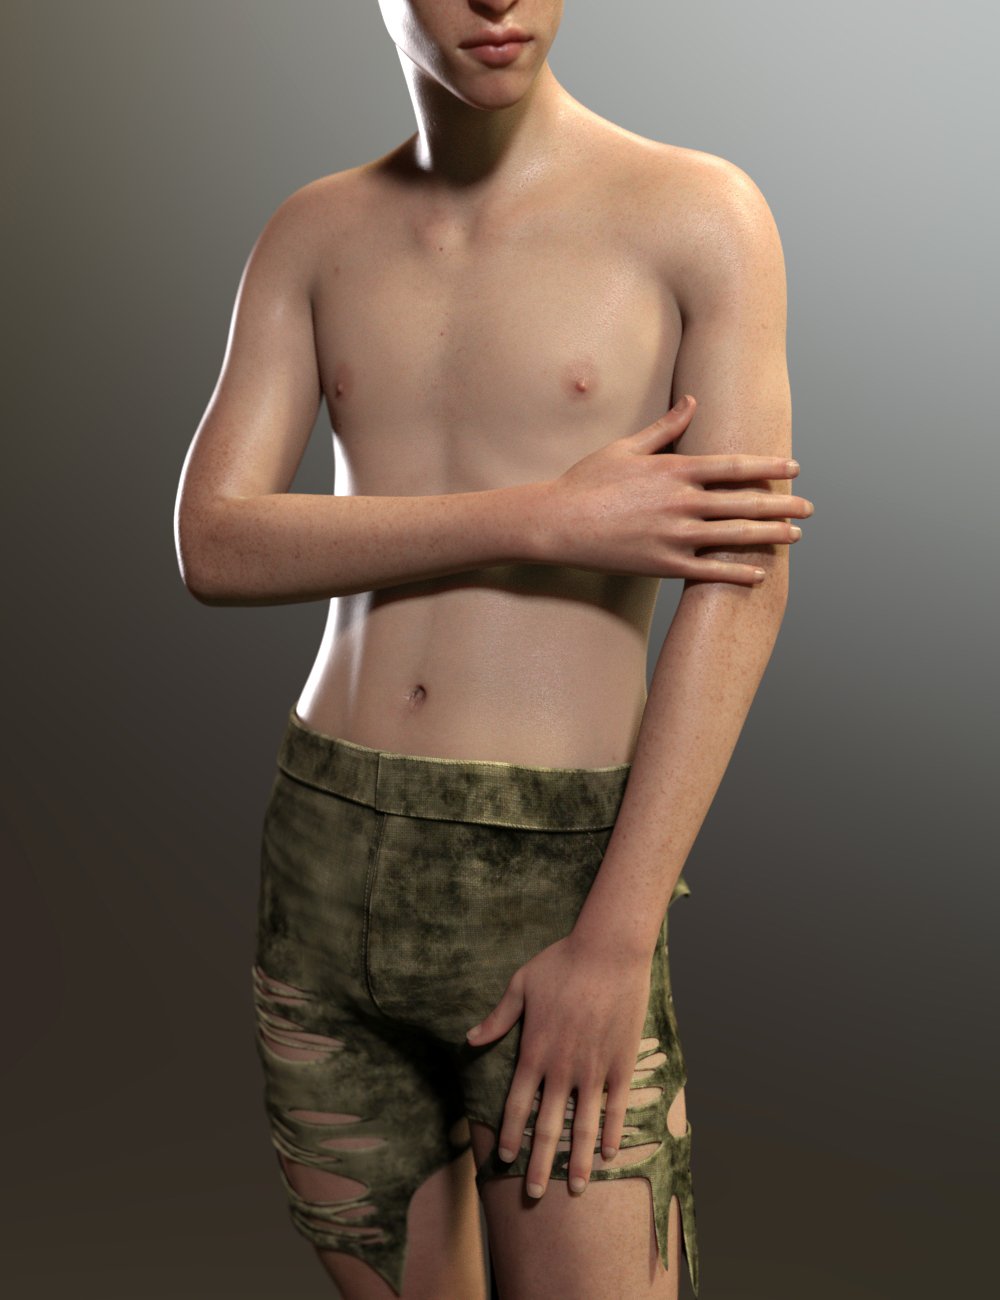 Fiore for Genesis 8 Male by: Saiyaness, 3D Models by Daz 3D